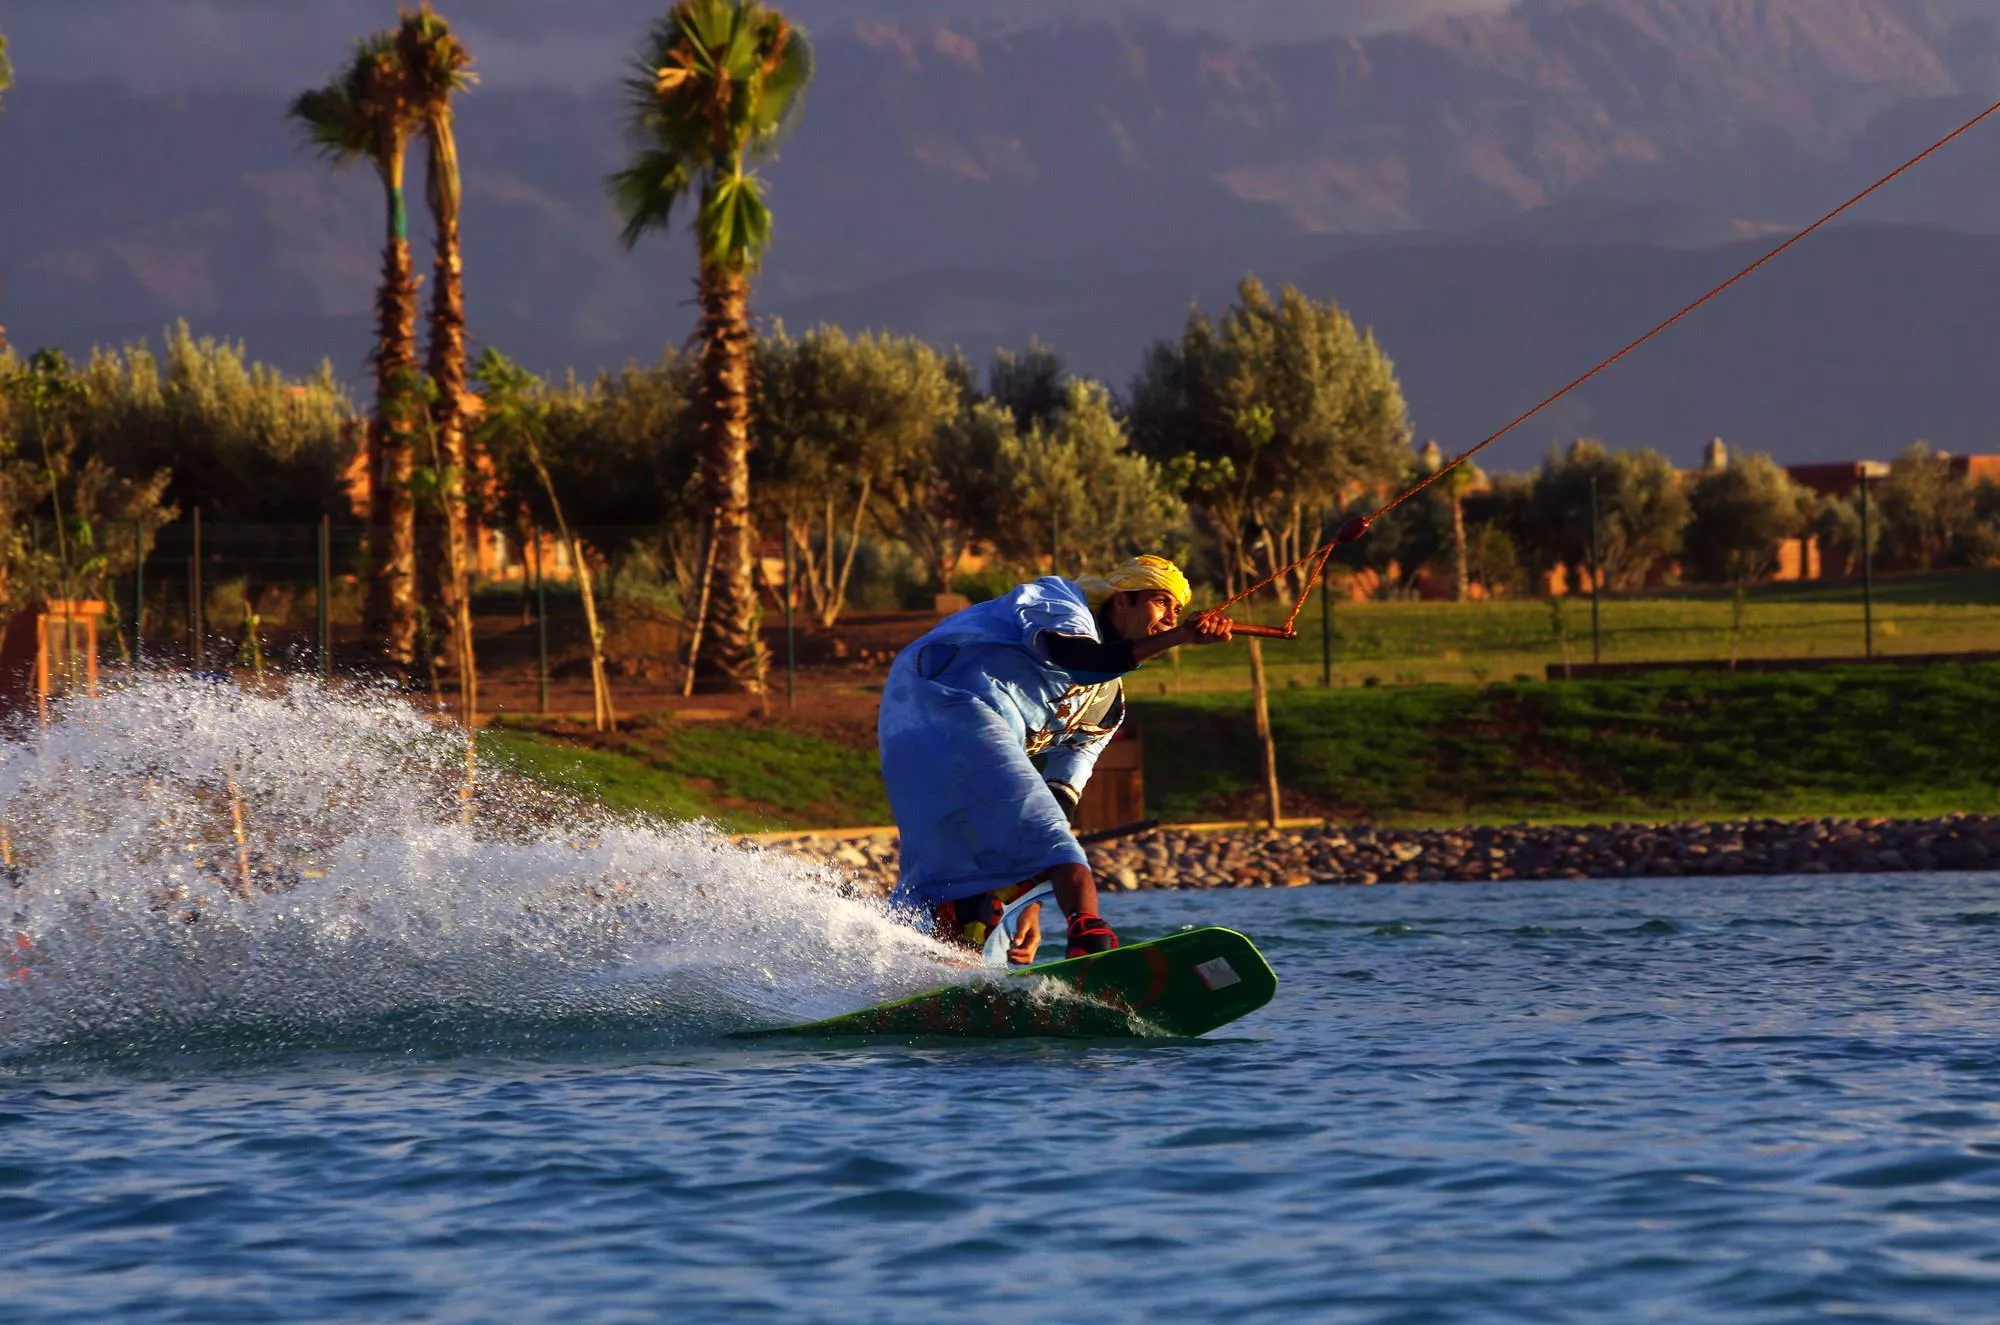 Waky Marrakech in Morocco, Africa | Wakeboarding - Rated 4.8